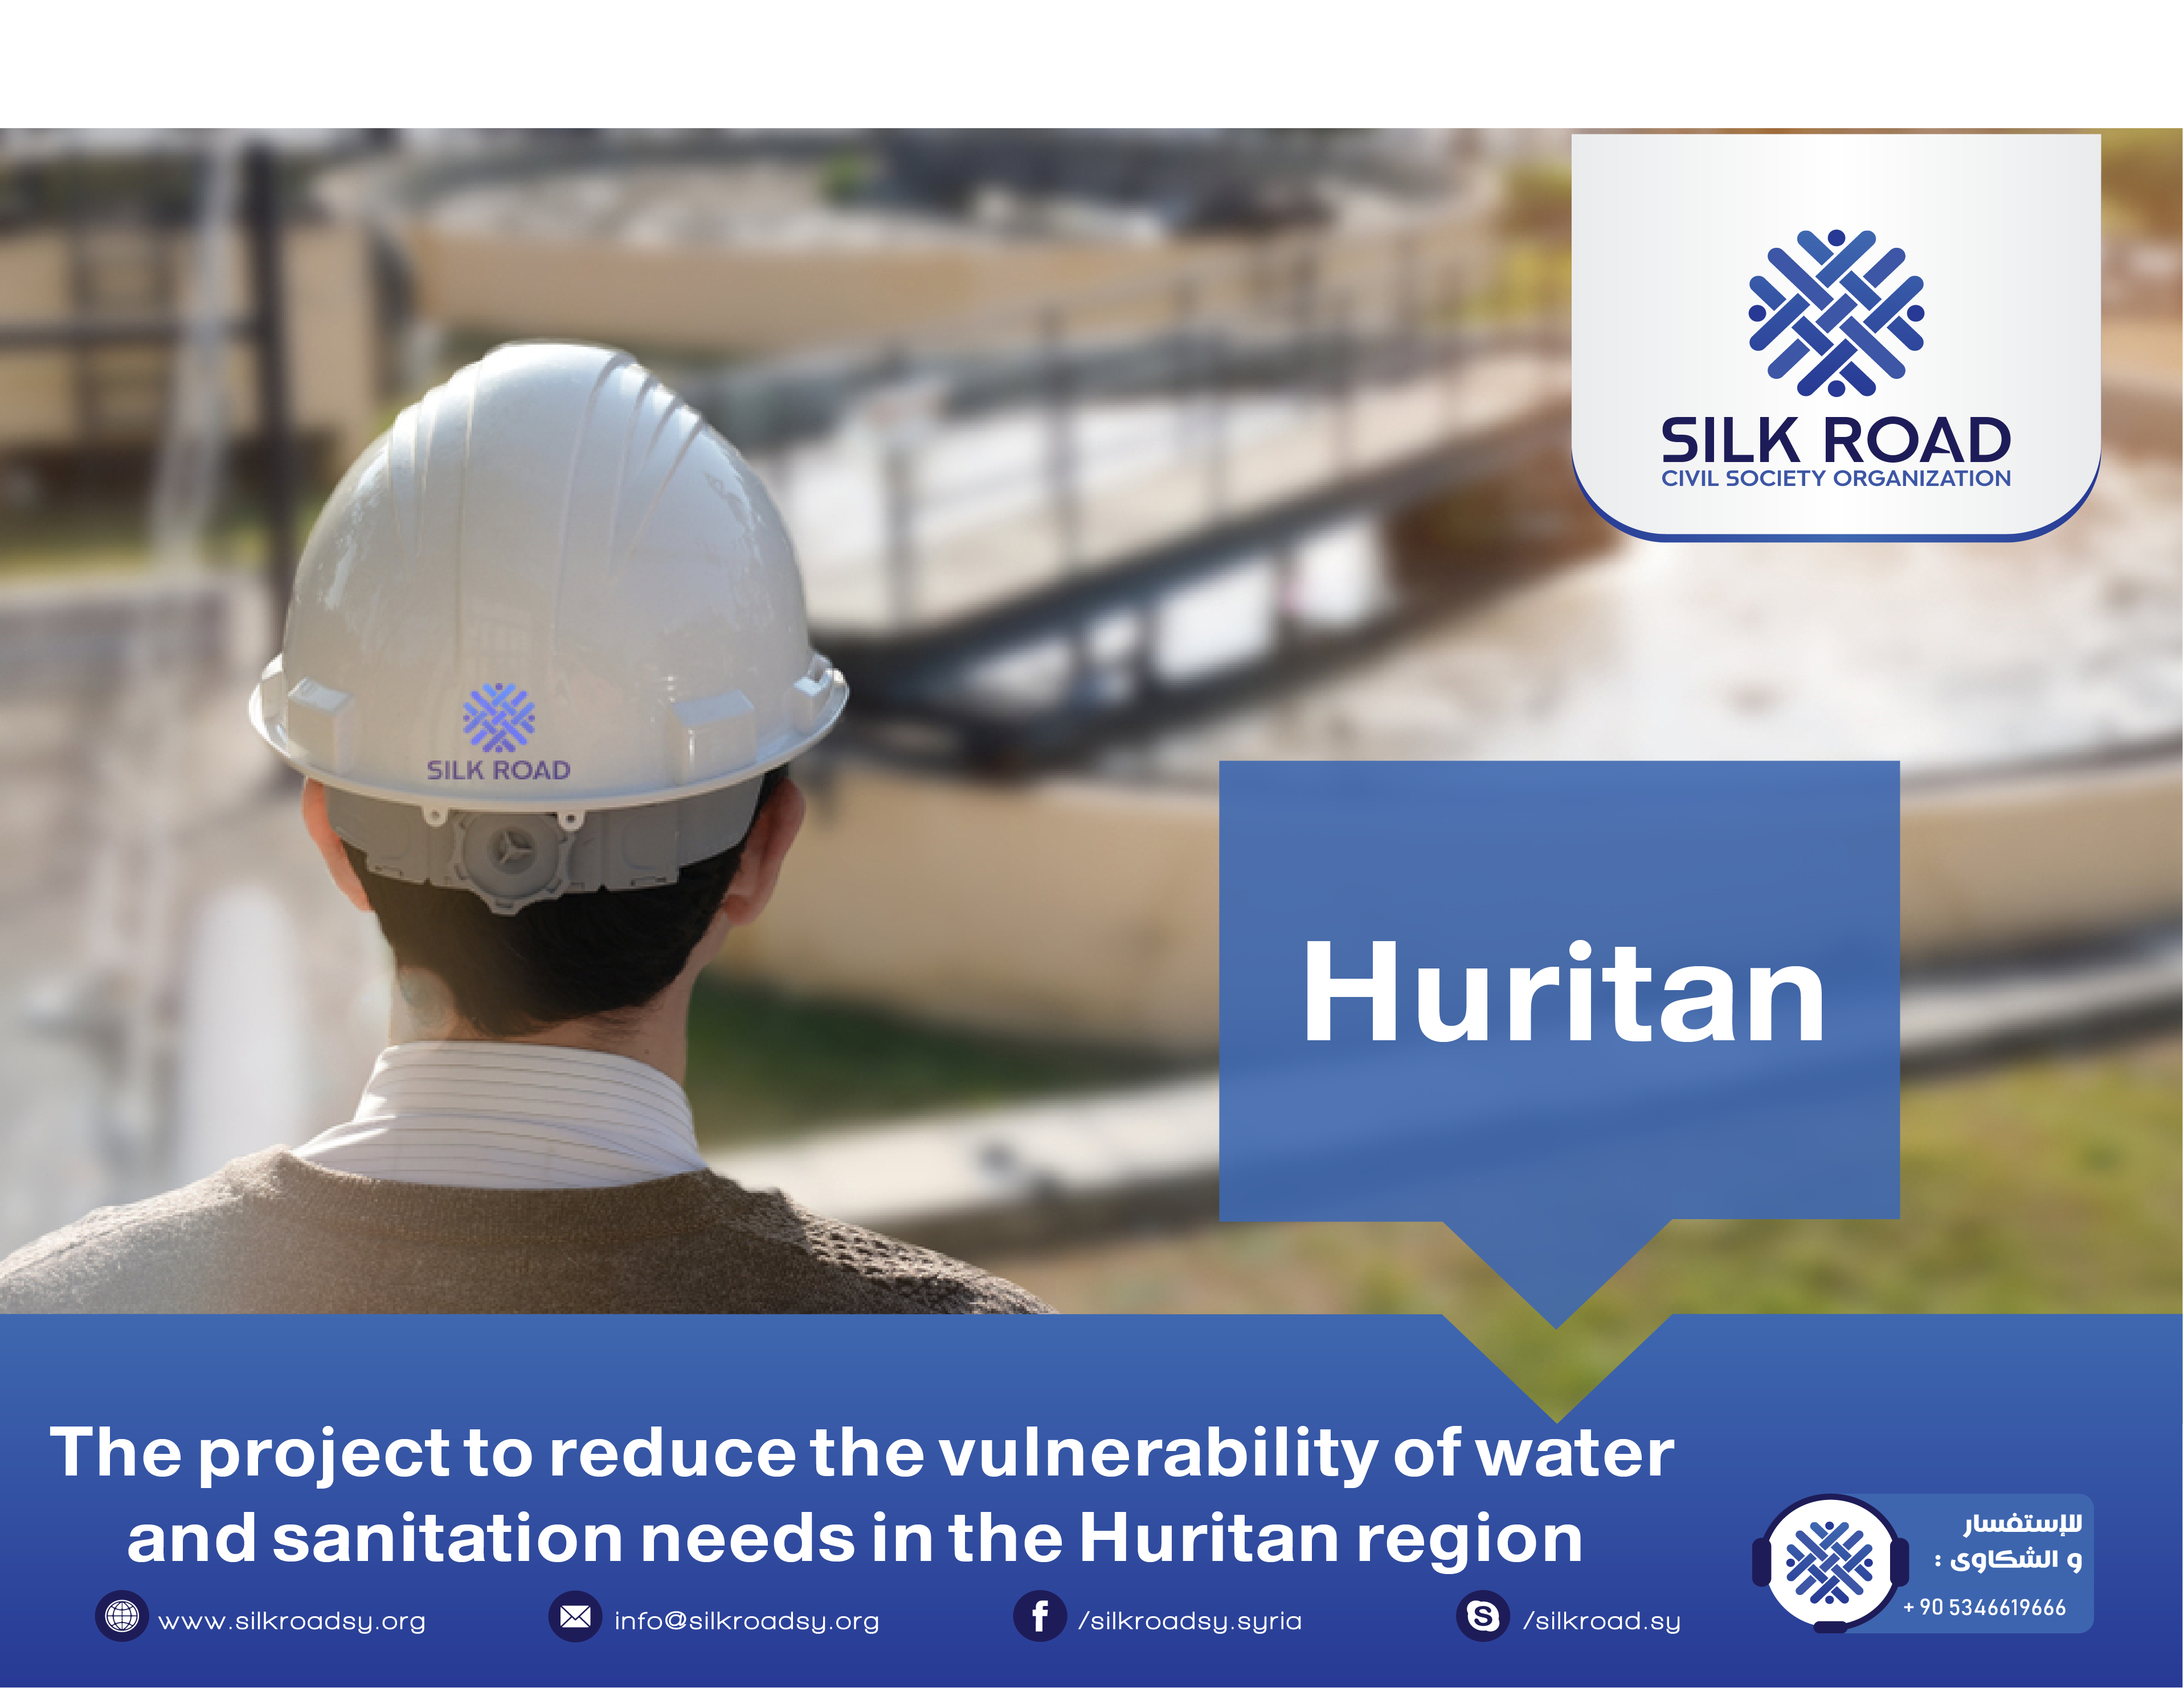 The project to reduce the vulnerability of water and sanitation needs in the Huritan region